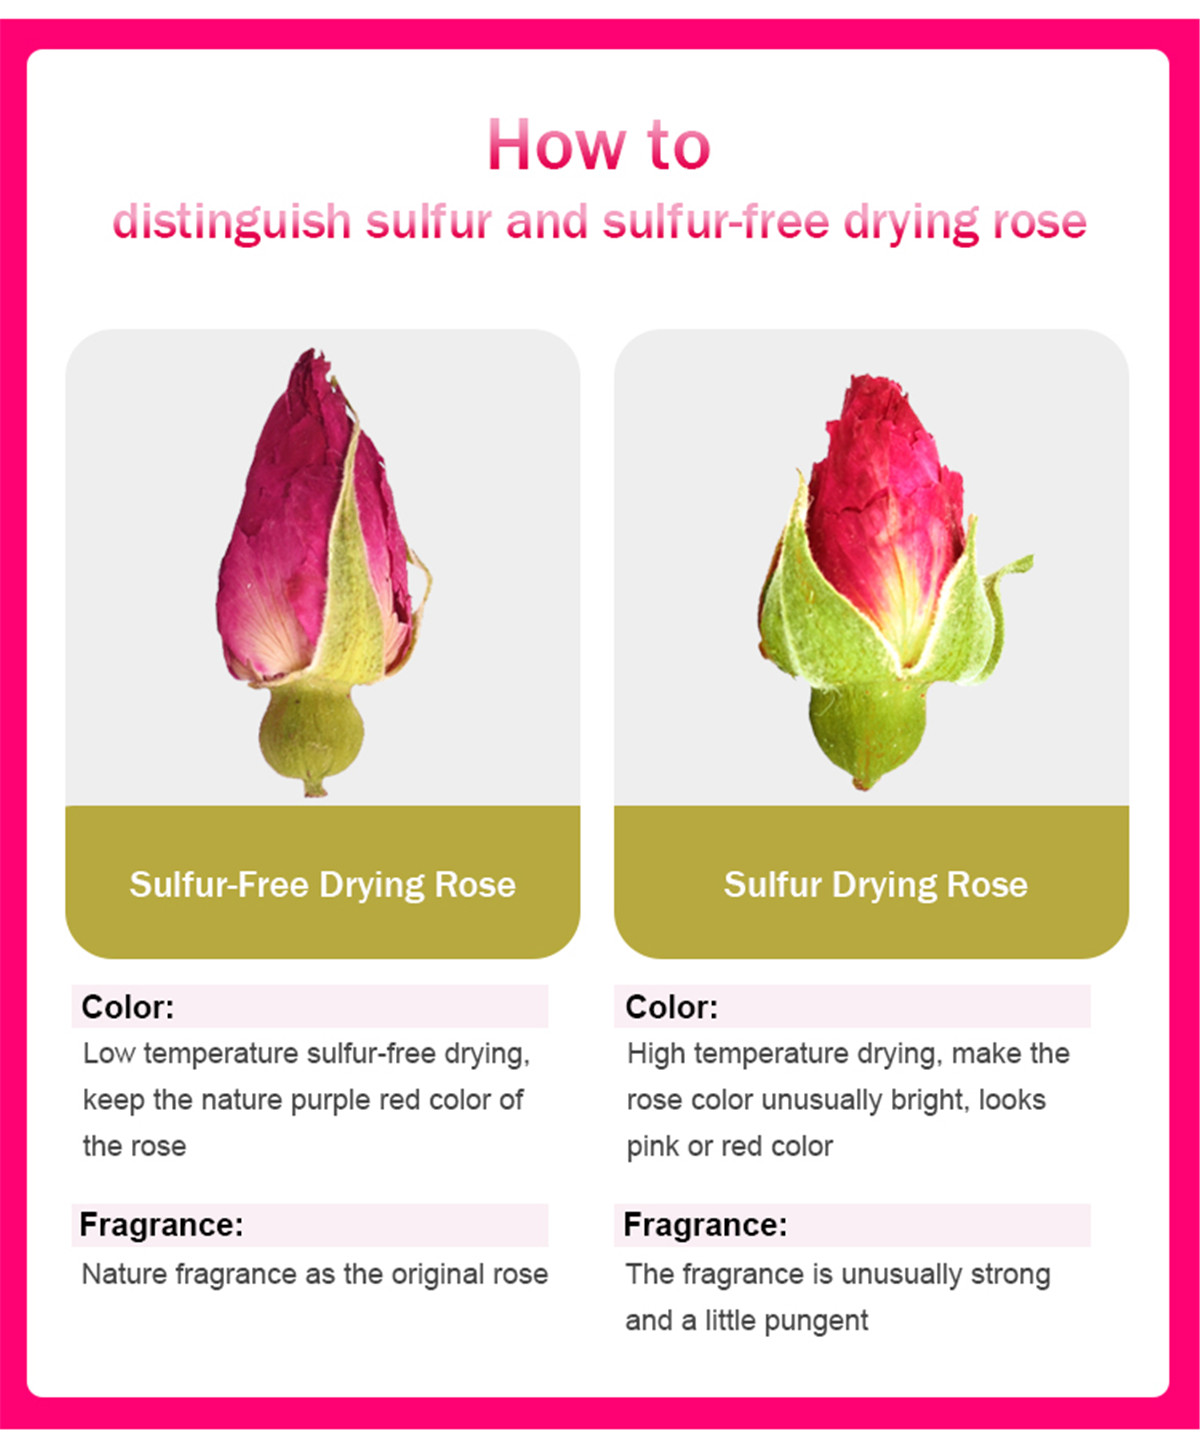 how to distinguish slfur and sulfur-free drying rose